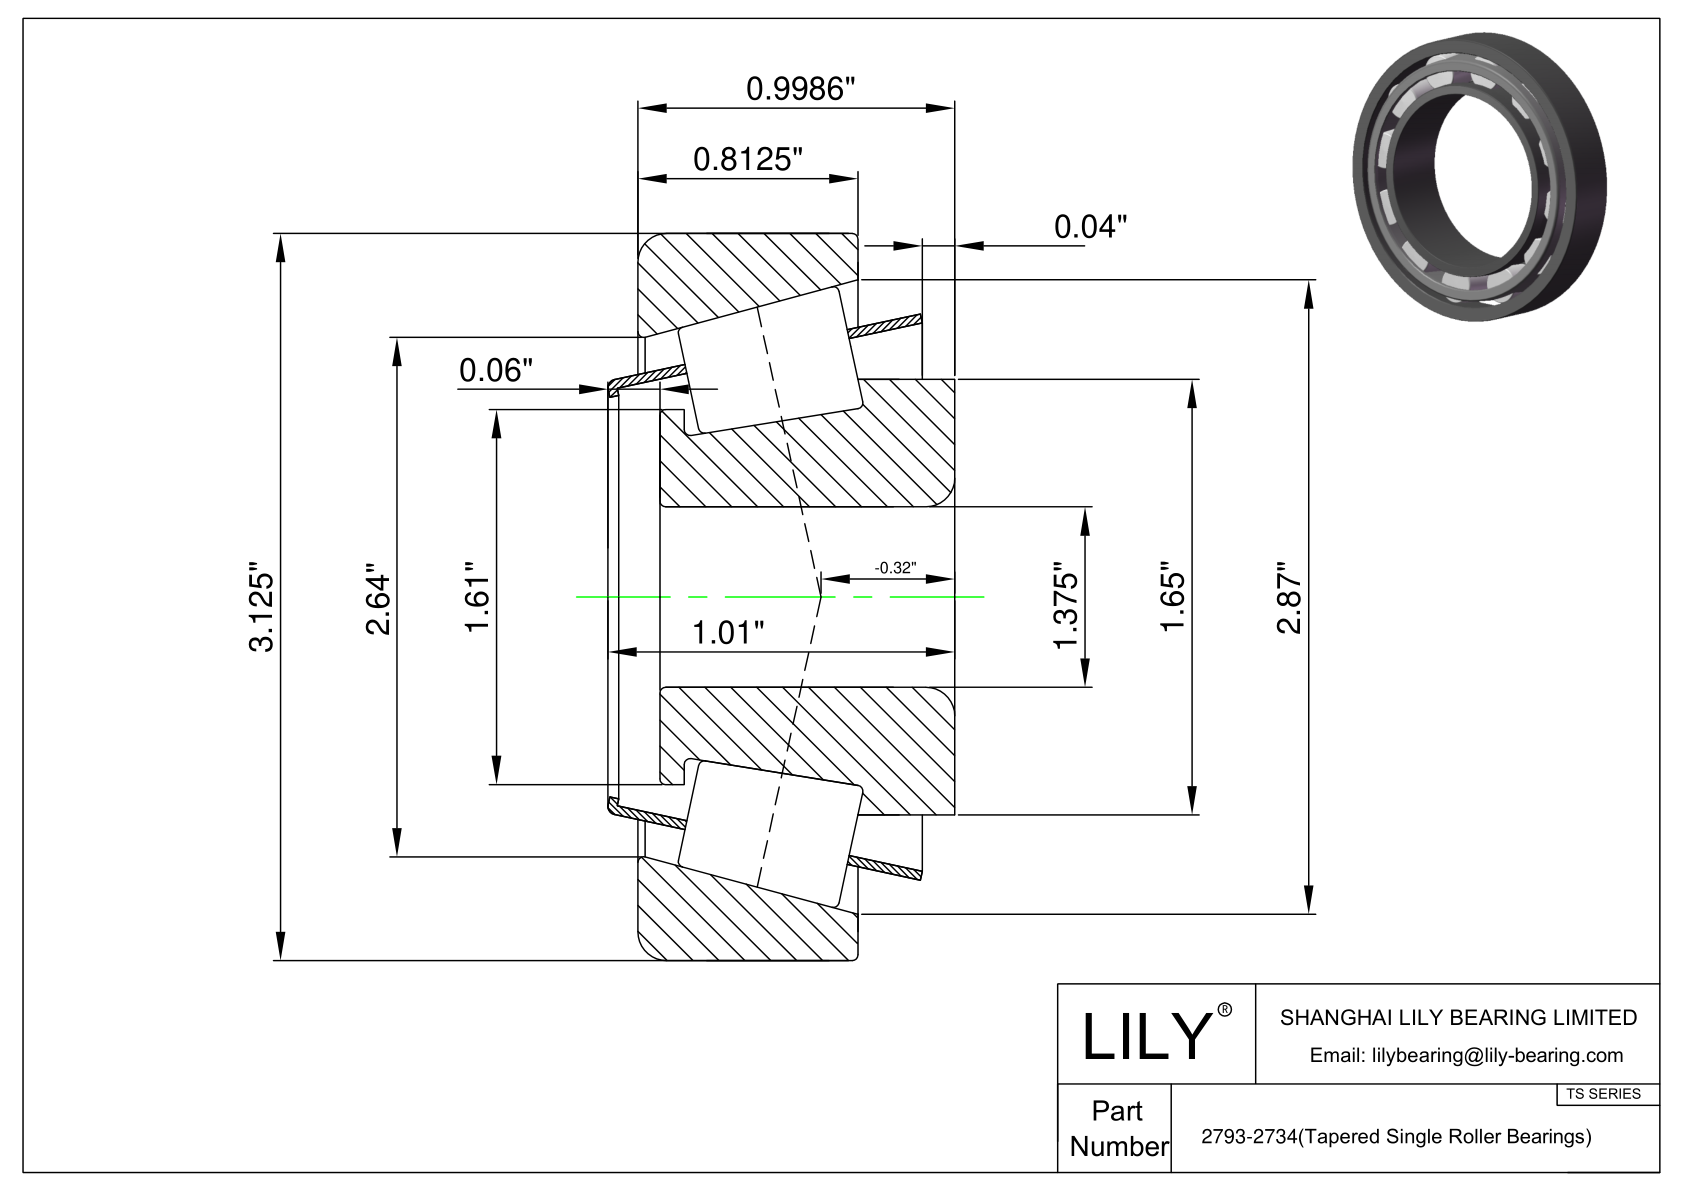 2793-2734 TS (Tapered Single Roller Bearings) (Imperial) cad drawing